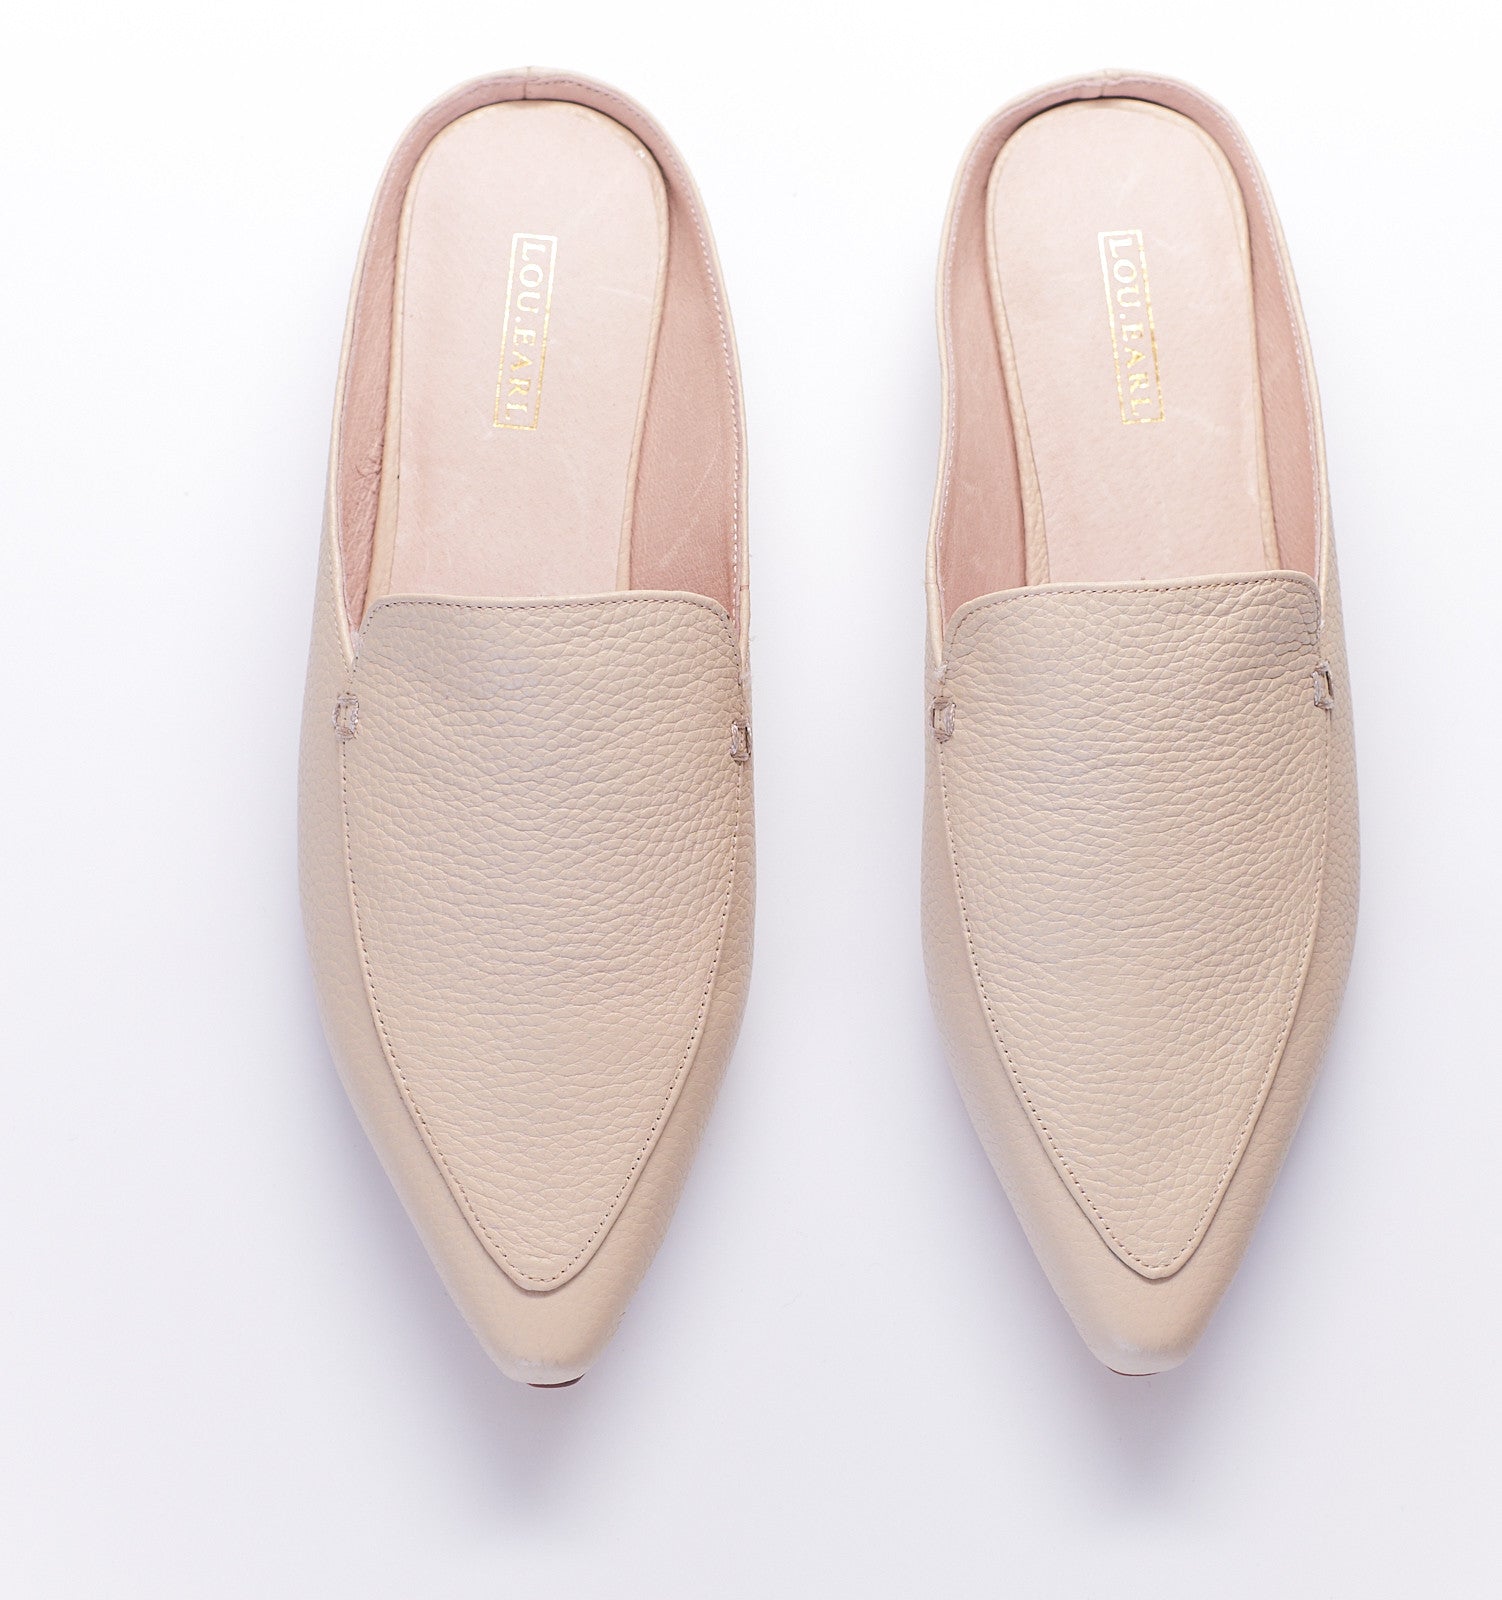 cream colored leather pointed toe mule slip on shoes for women. classic original mule shoes.